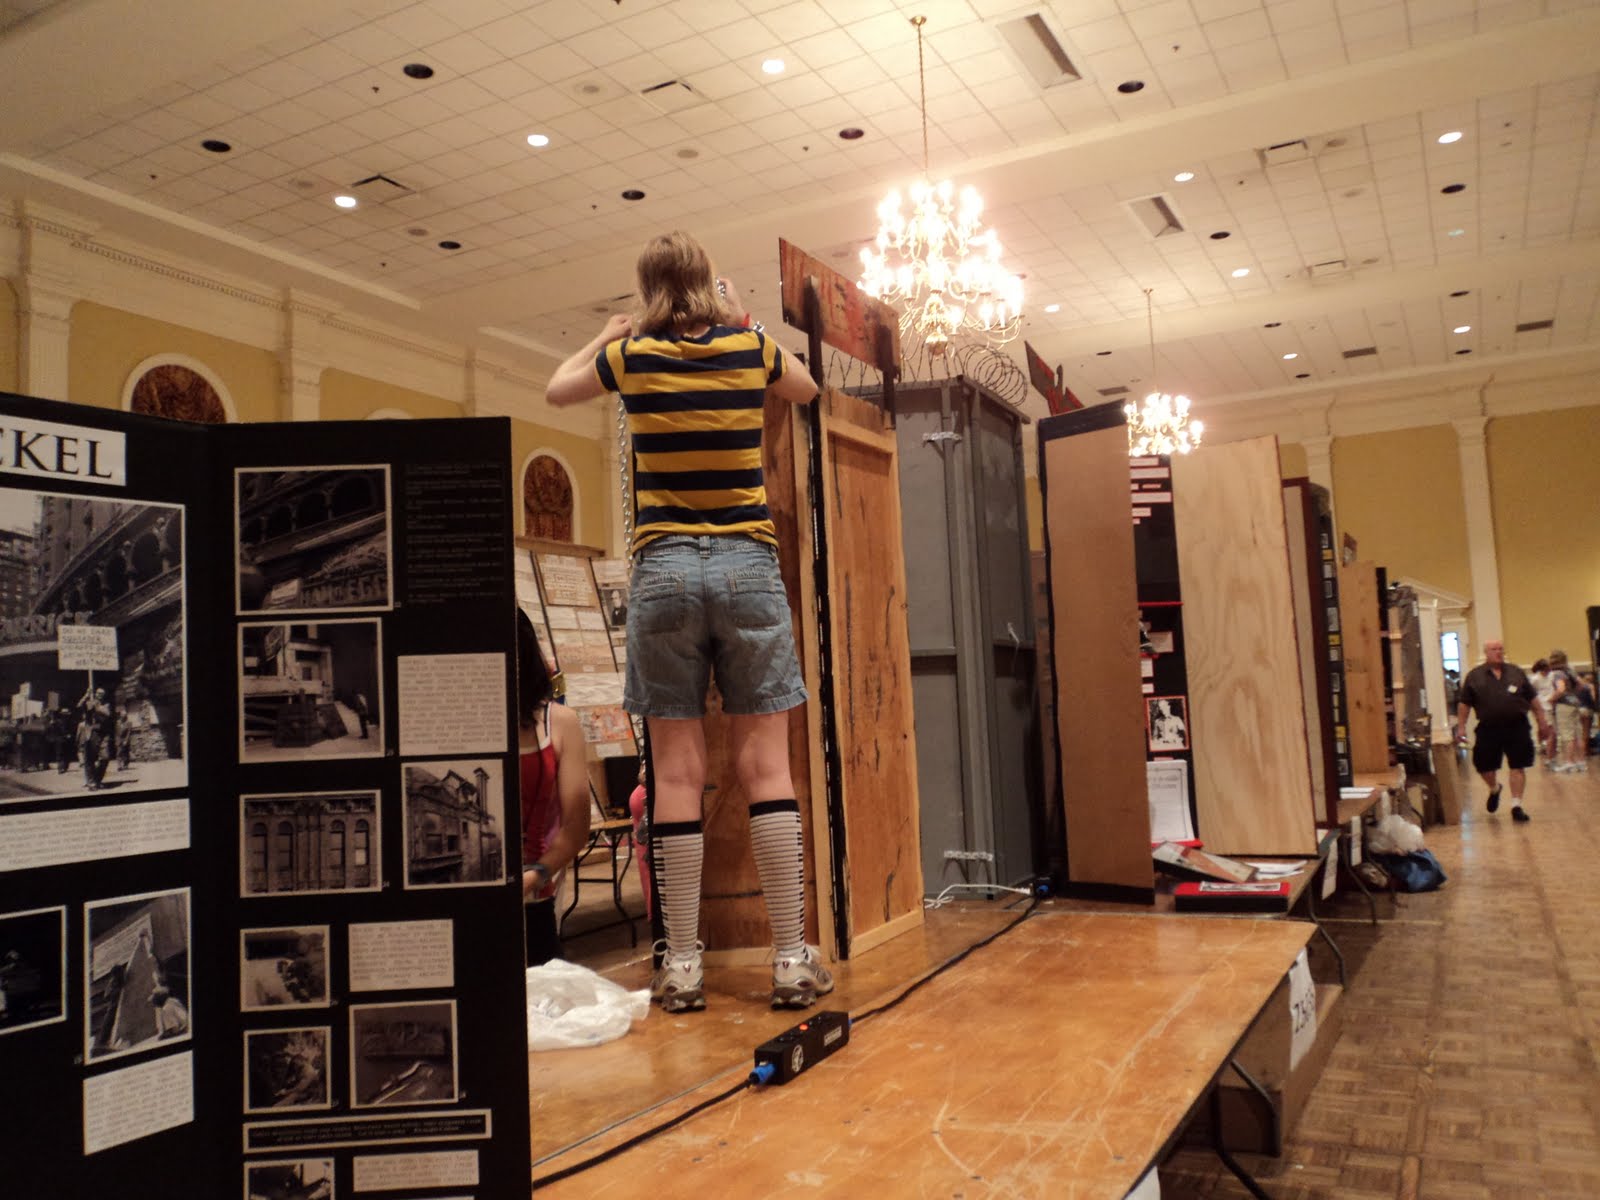 Getting set up for the exhibit category at National History Day finals